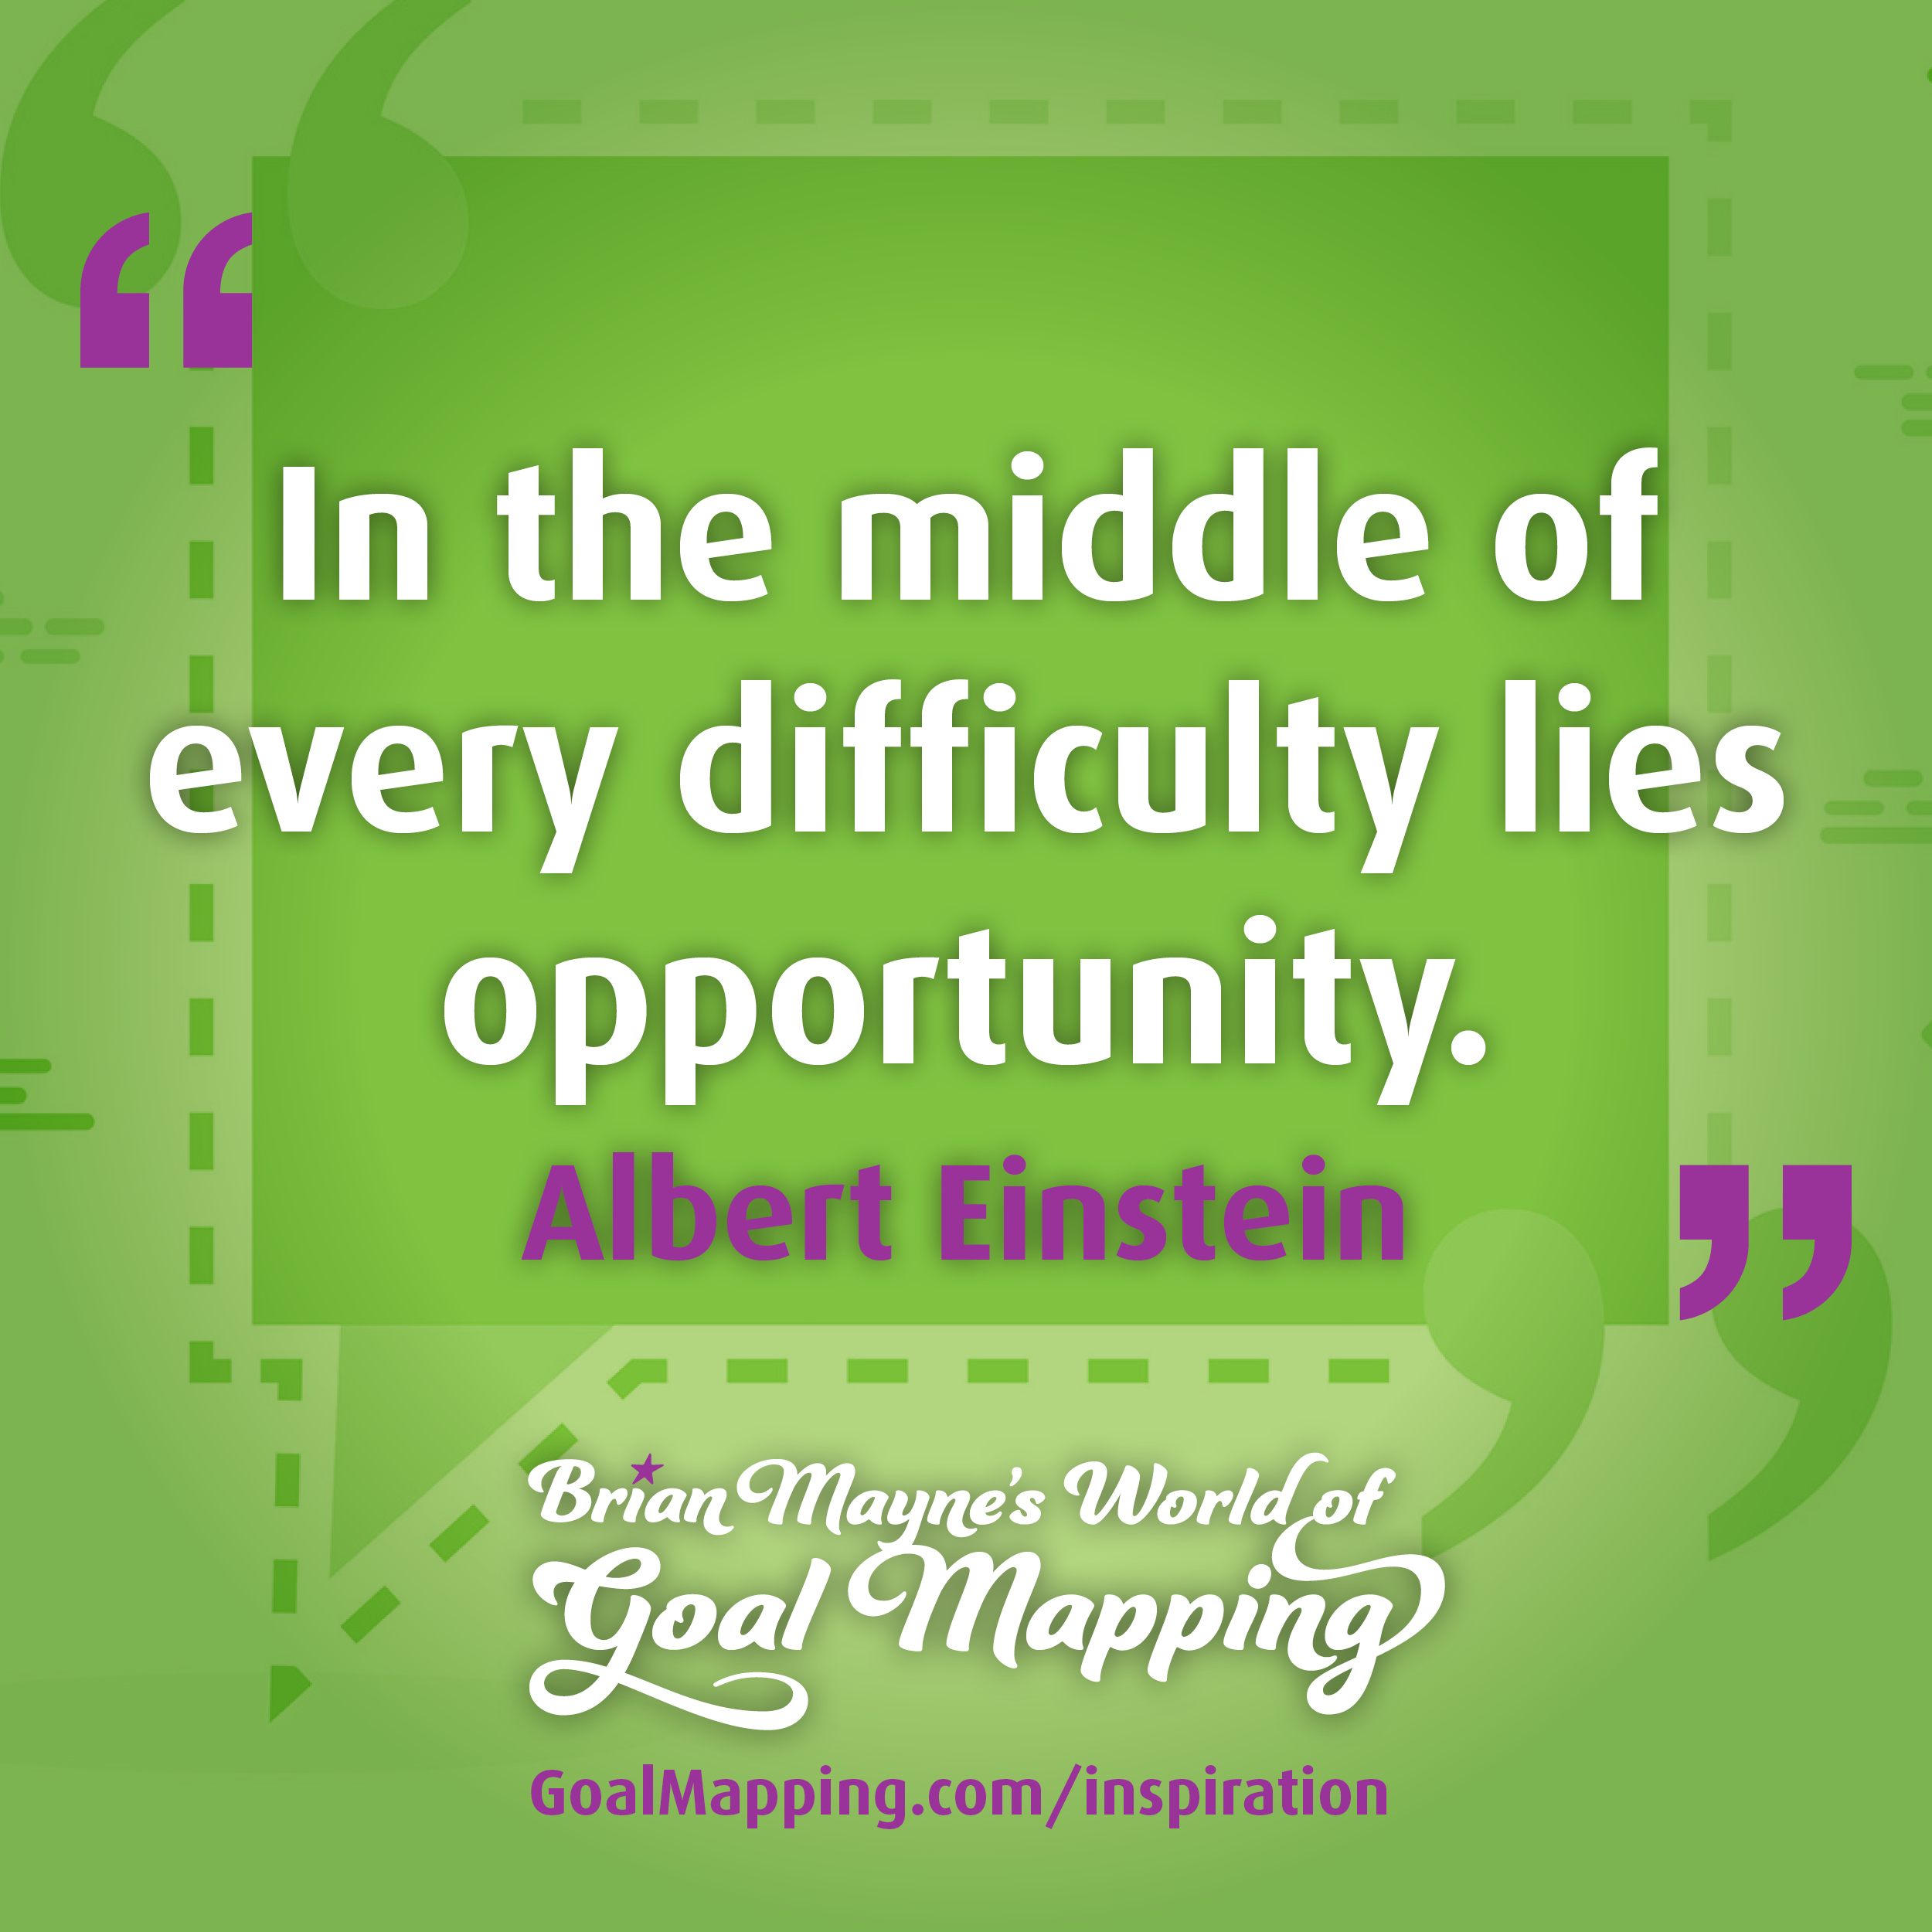 "In the middle of every difficulty lies opportunity." Albert Einstein